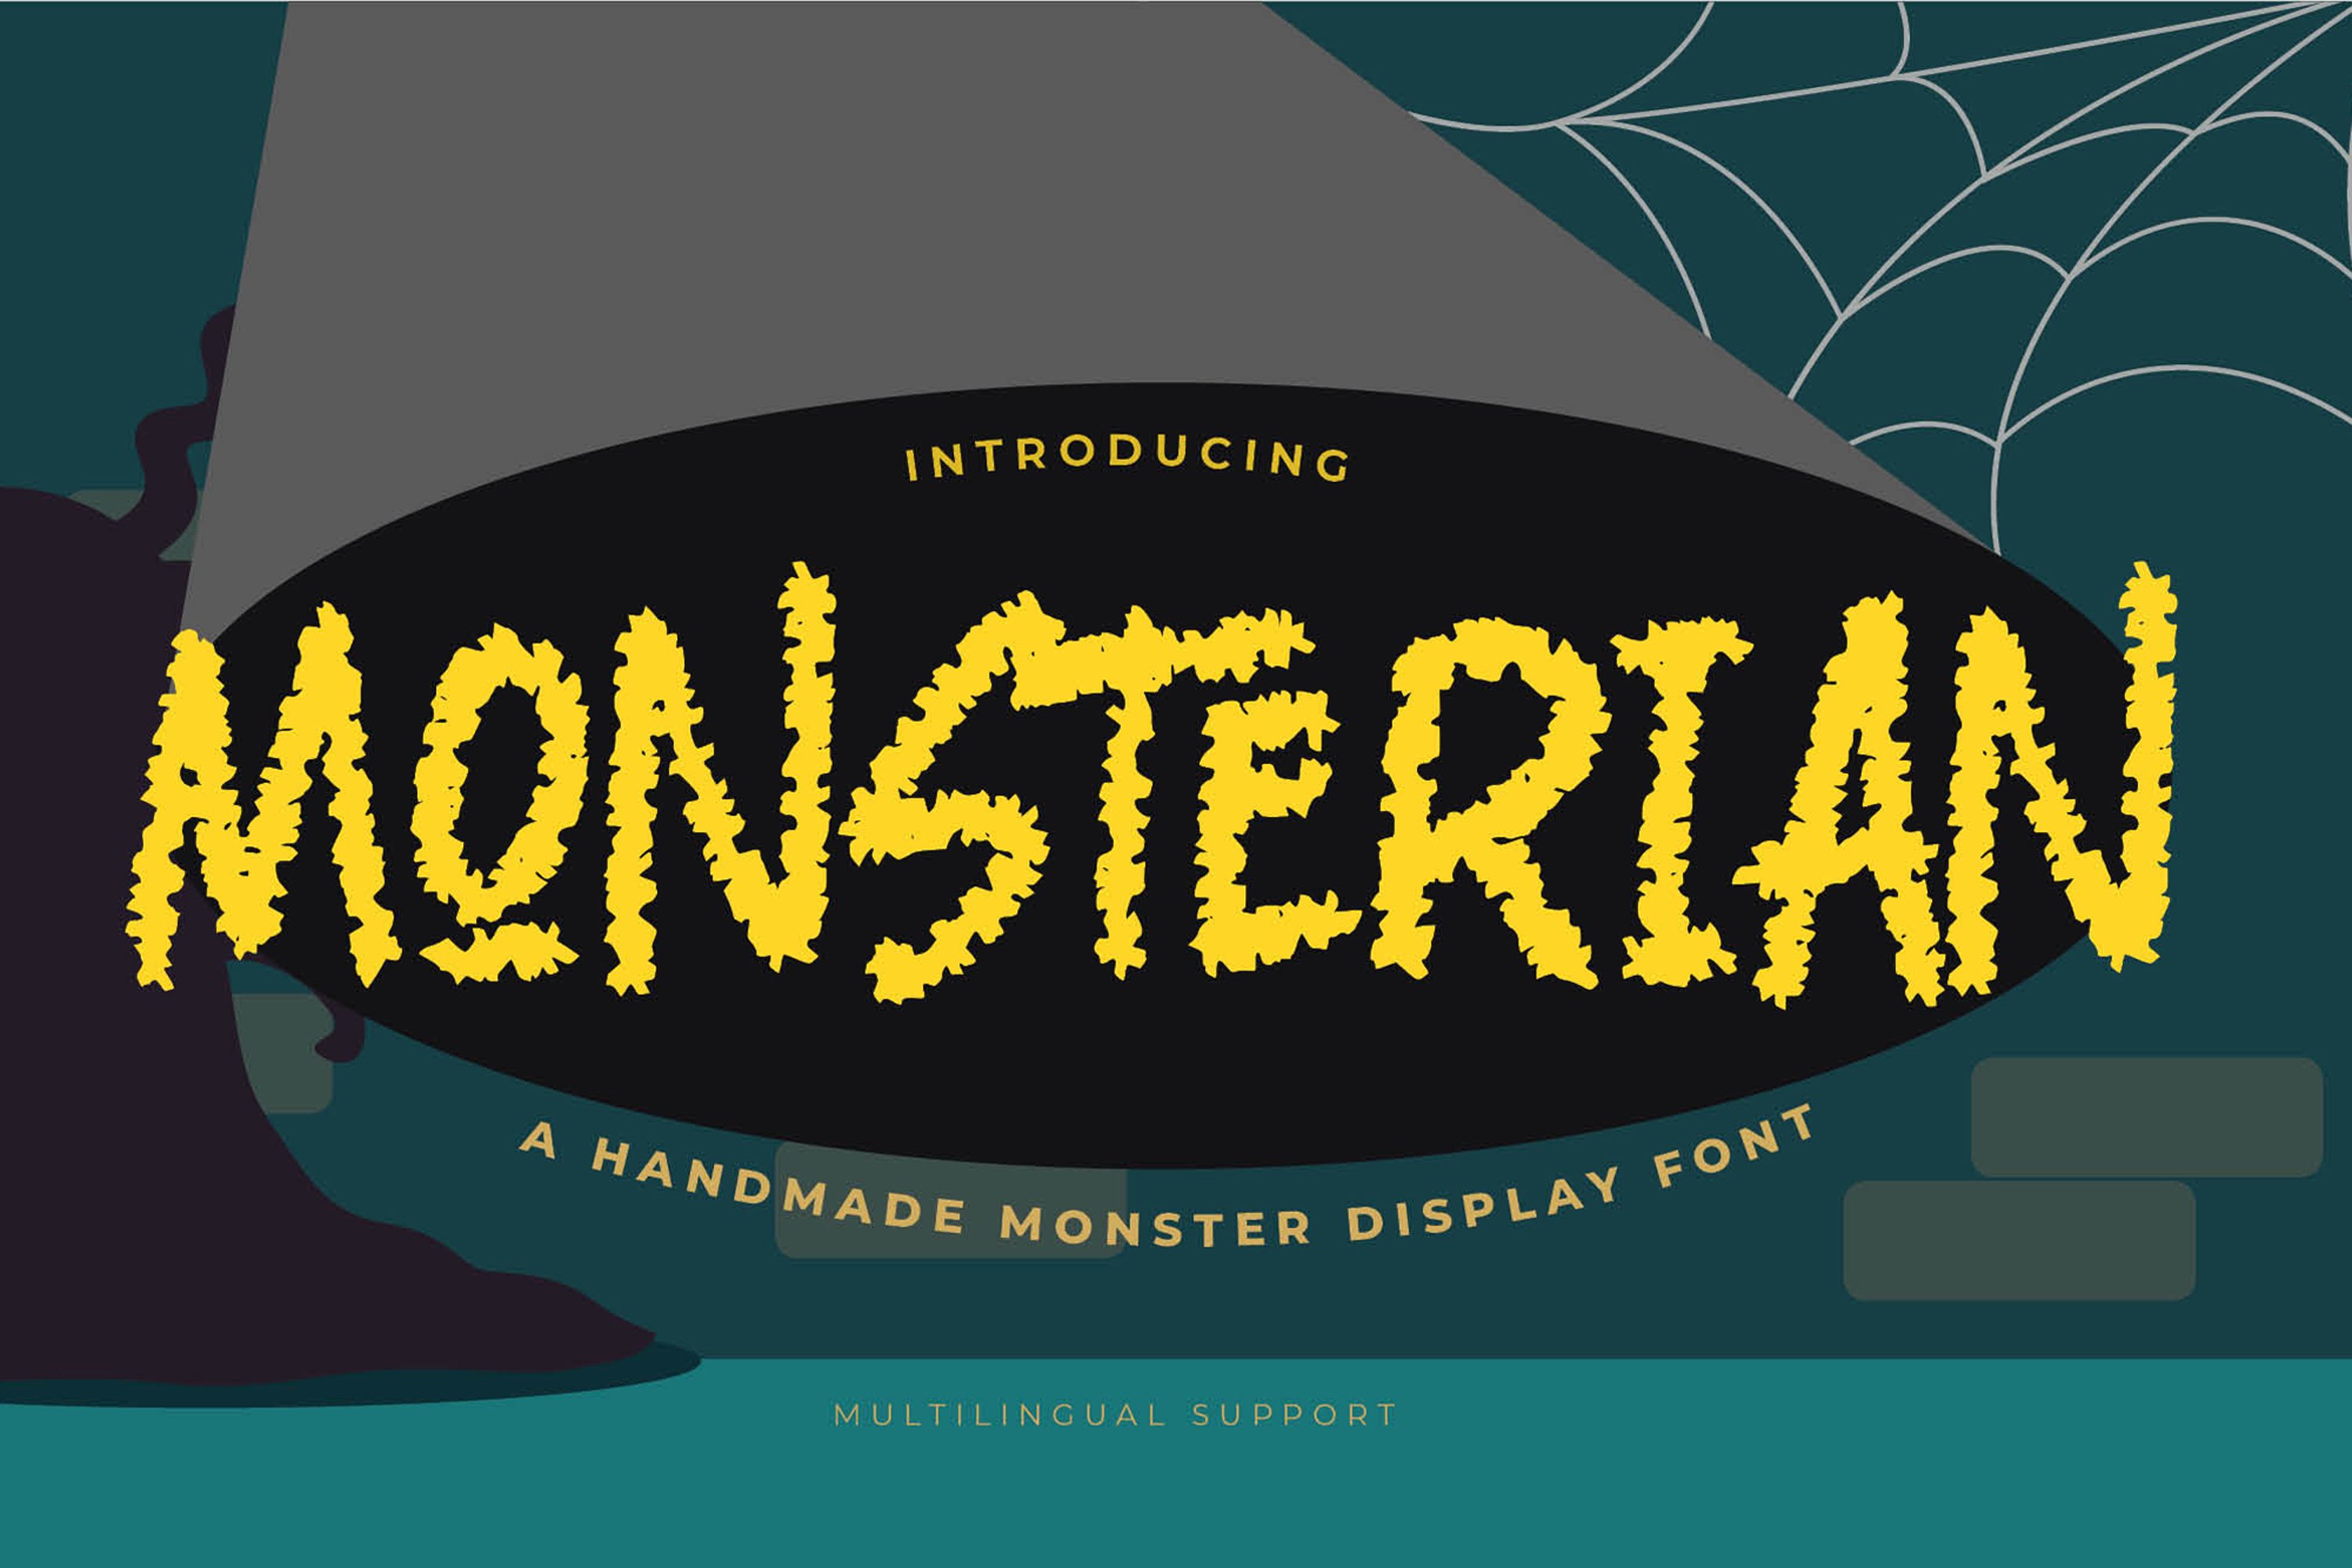 Monsterian - Handmade Moster Display cover image.